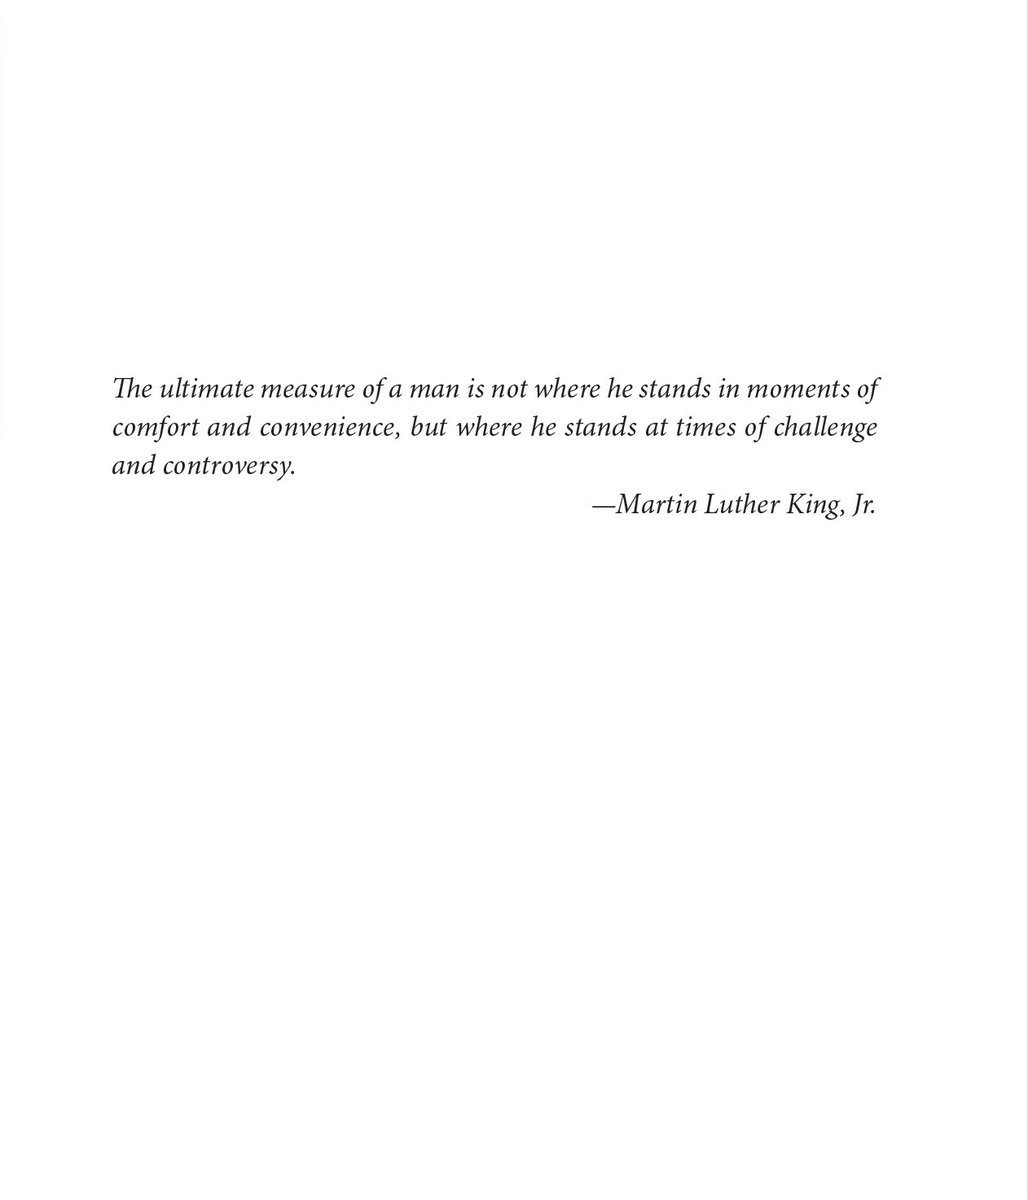 This seems like a good time to share the epigraph for the book. Happy MLK Day!